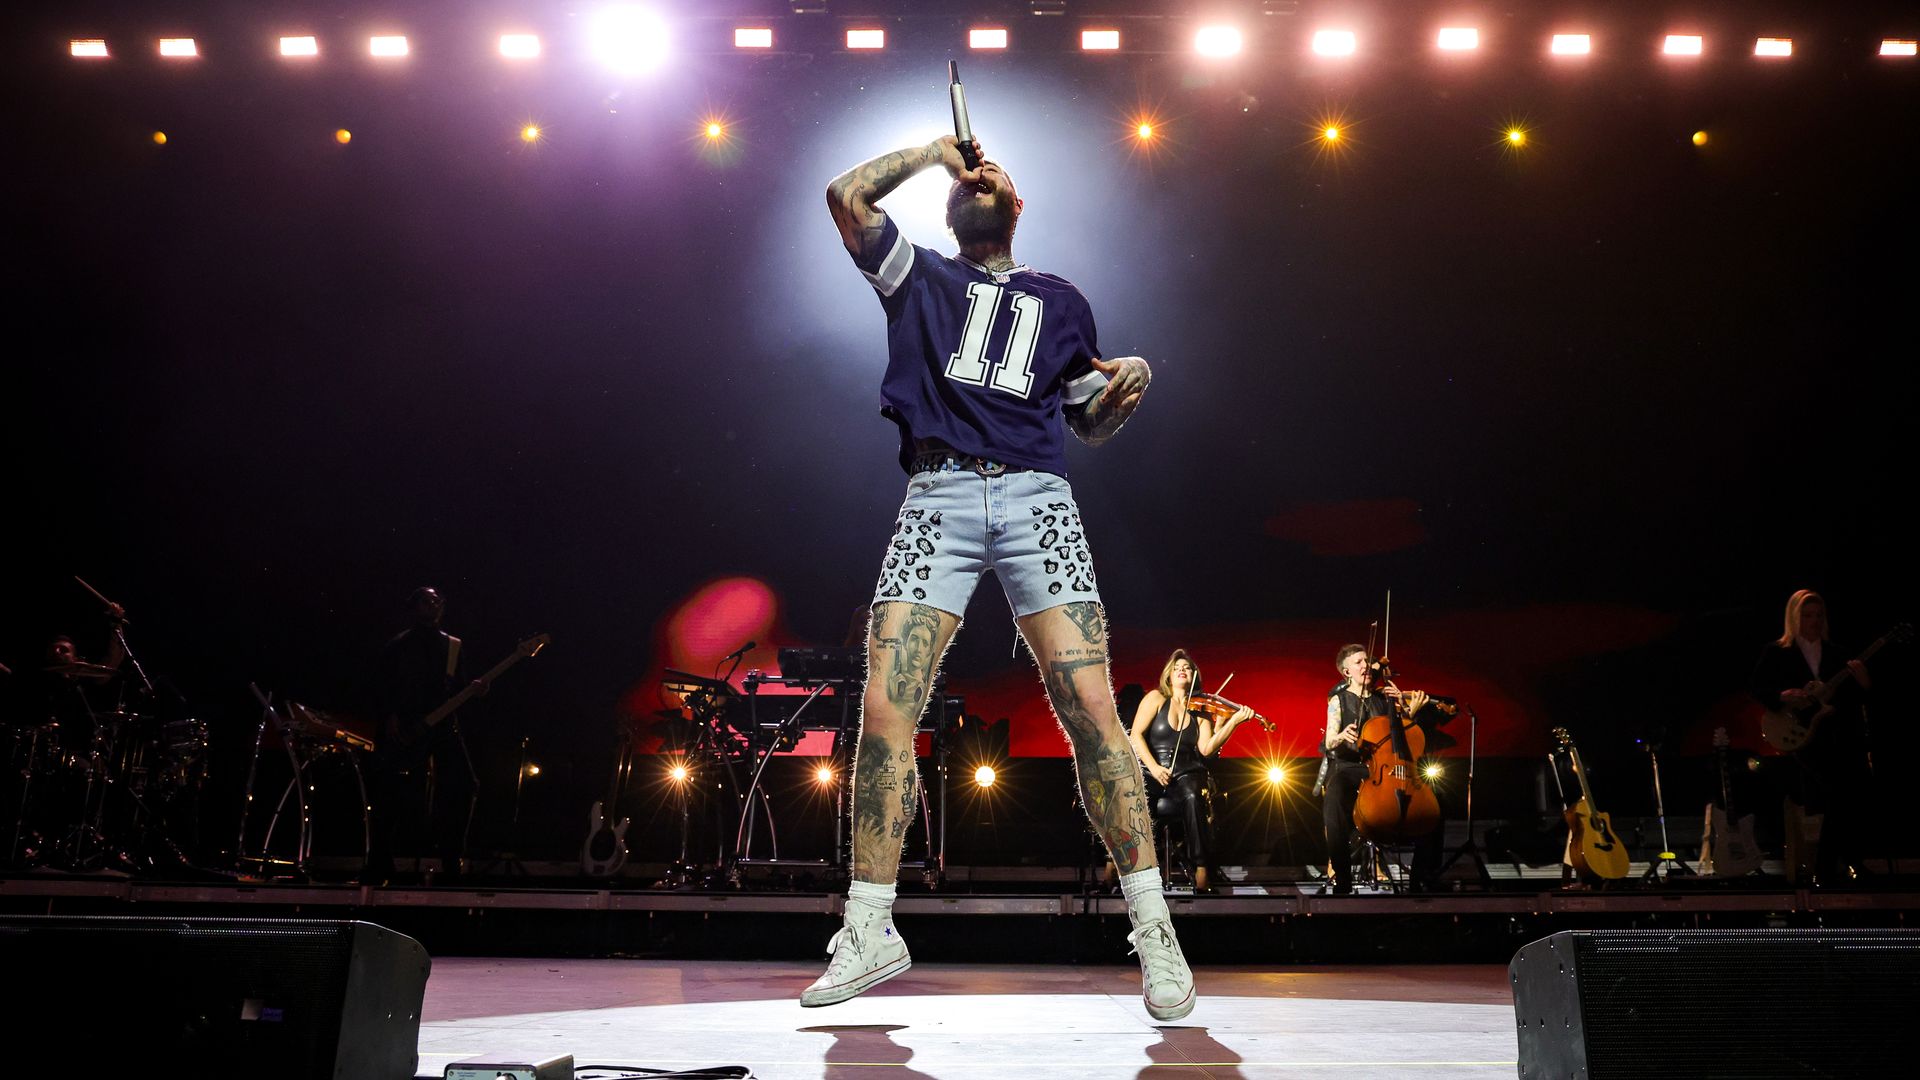  A photo of Post Malone wearing a Cowboys jersey and shorts singing 